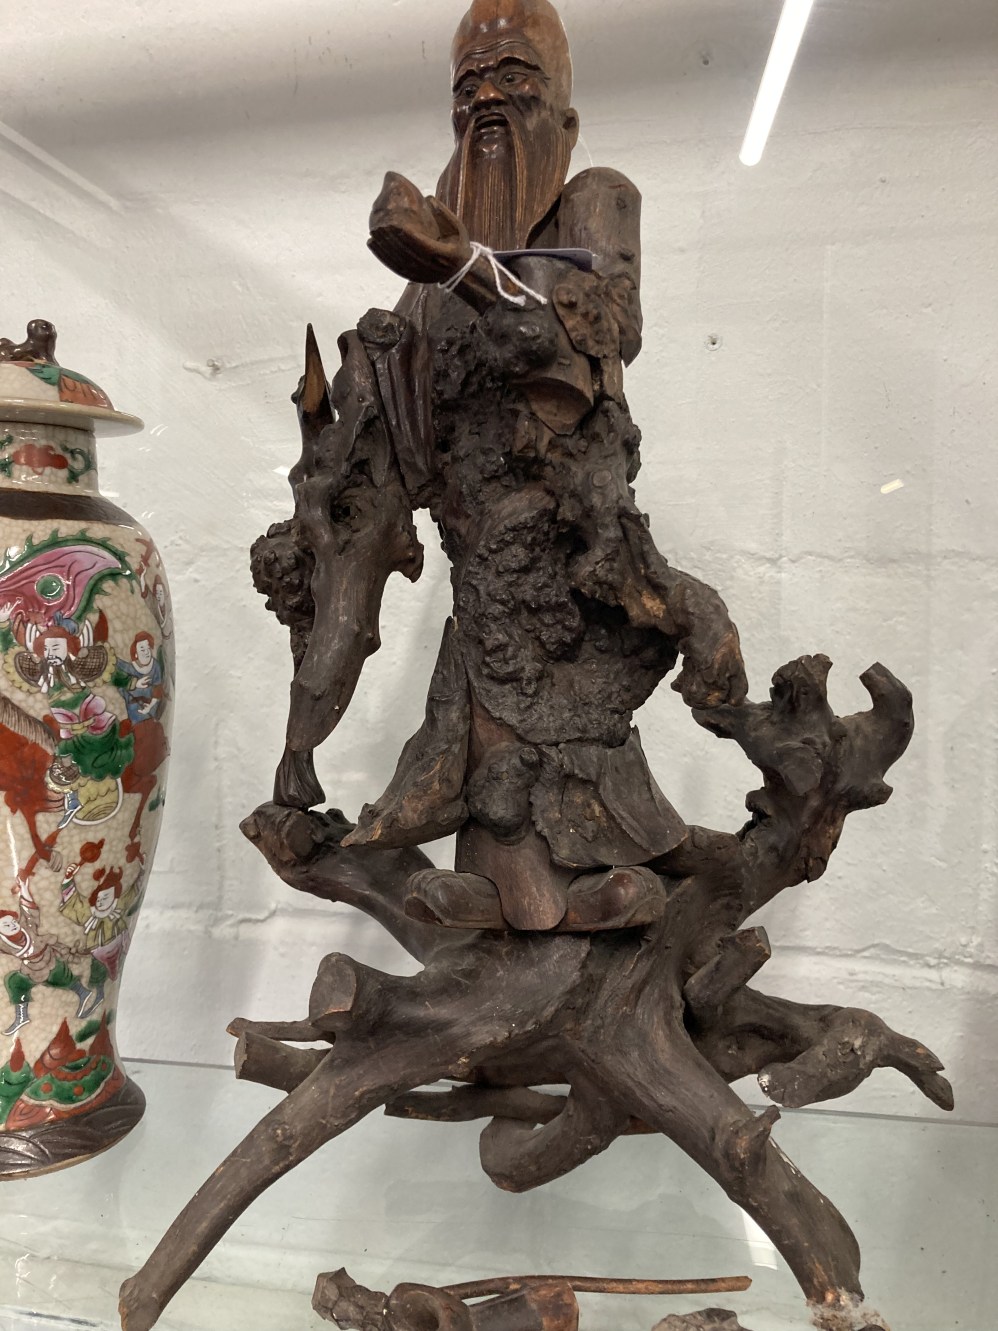 19th cent. Qing Dynasty carved rootwood figure of Shoulao shown standing holding a staff and a peach